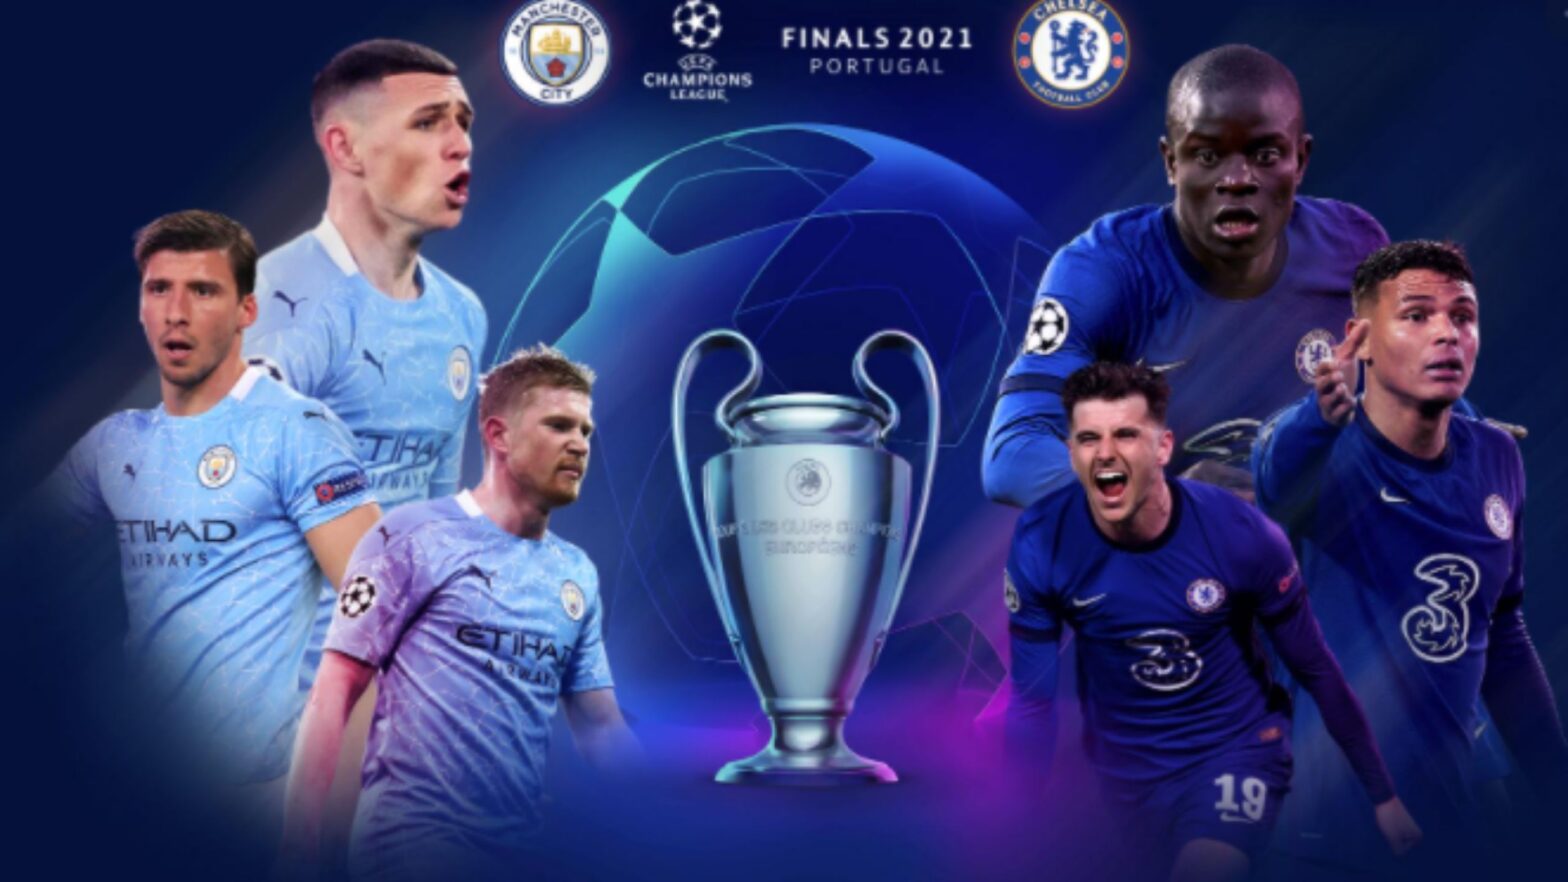 Champions League Final Live Where to Watch The Live Action in UK, USA and India? - The SportsGrail